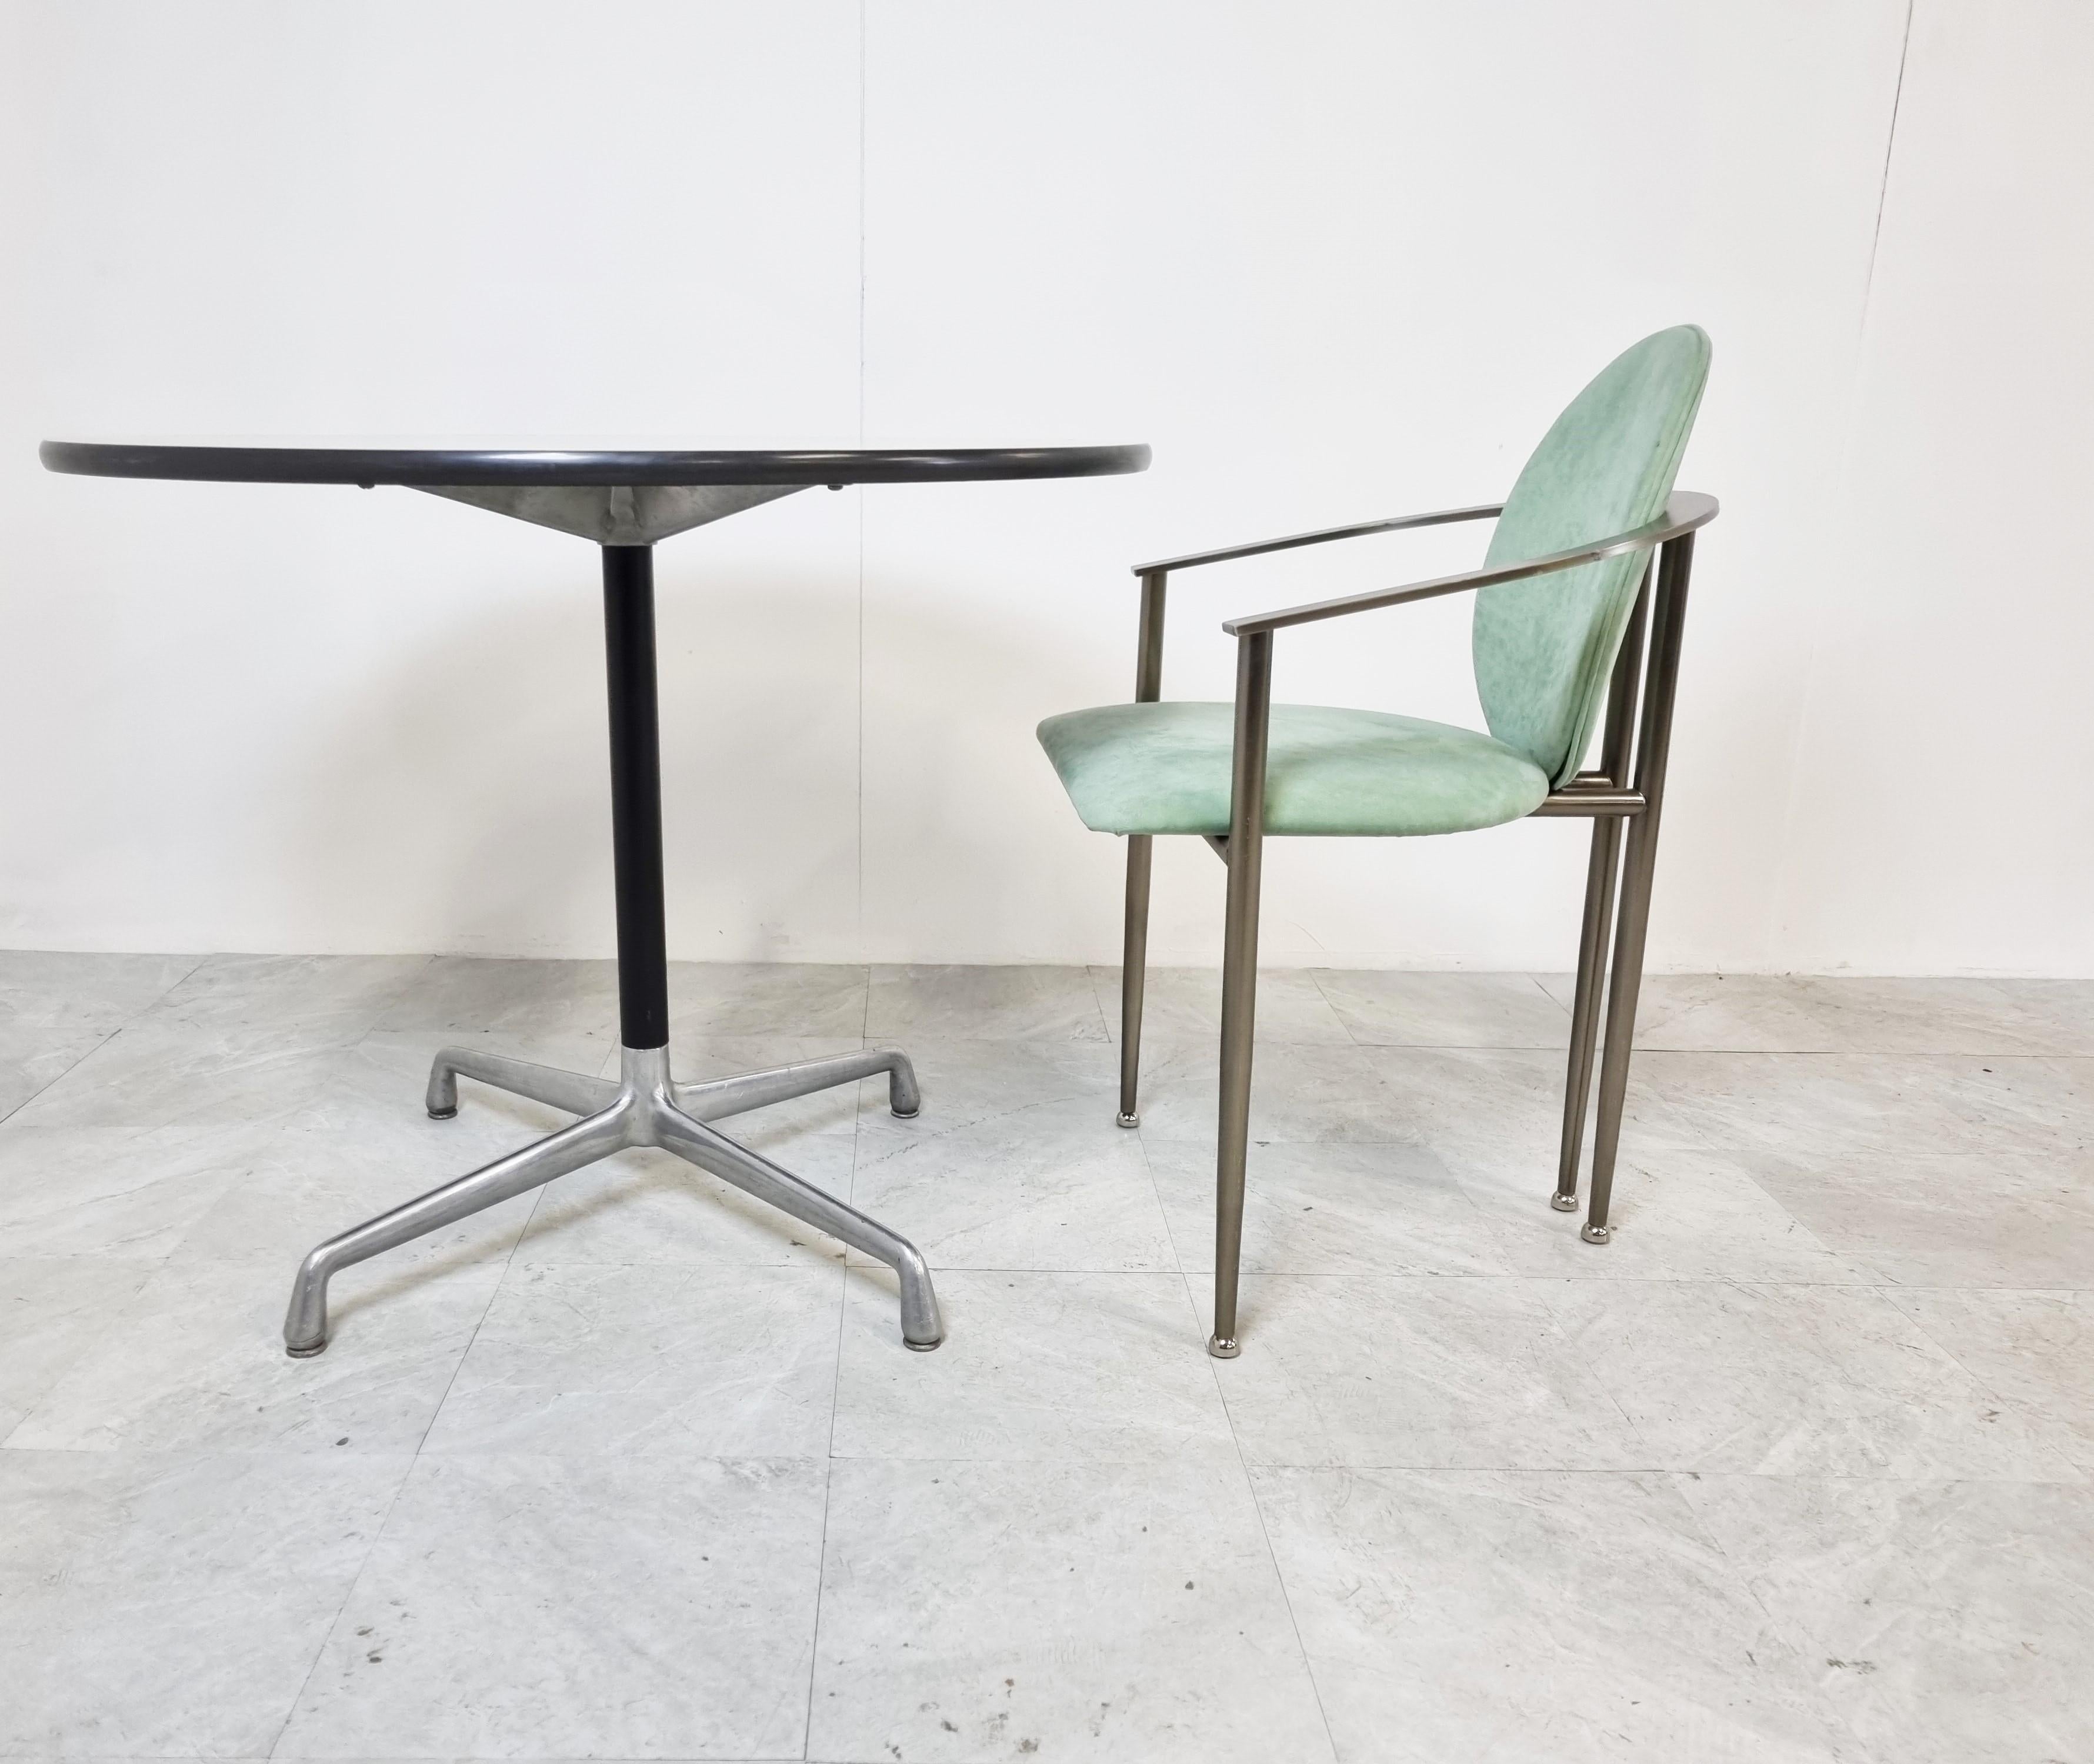 Vintage 'contract' dining or side table by Charles and Ray Eames for Herman Miller.

The Eames contract tables were designed together with the Aluminium Group chairs and feature the latter's cruciform base

The table is in good original